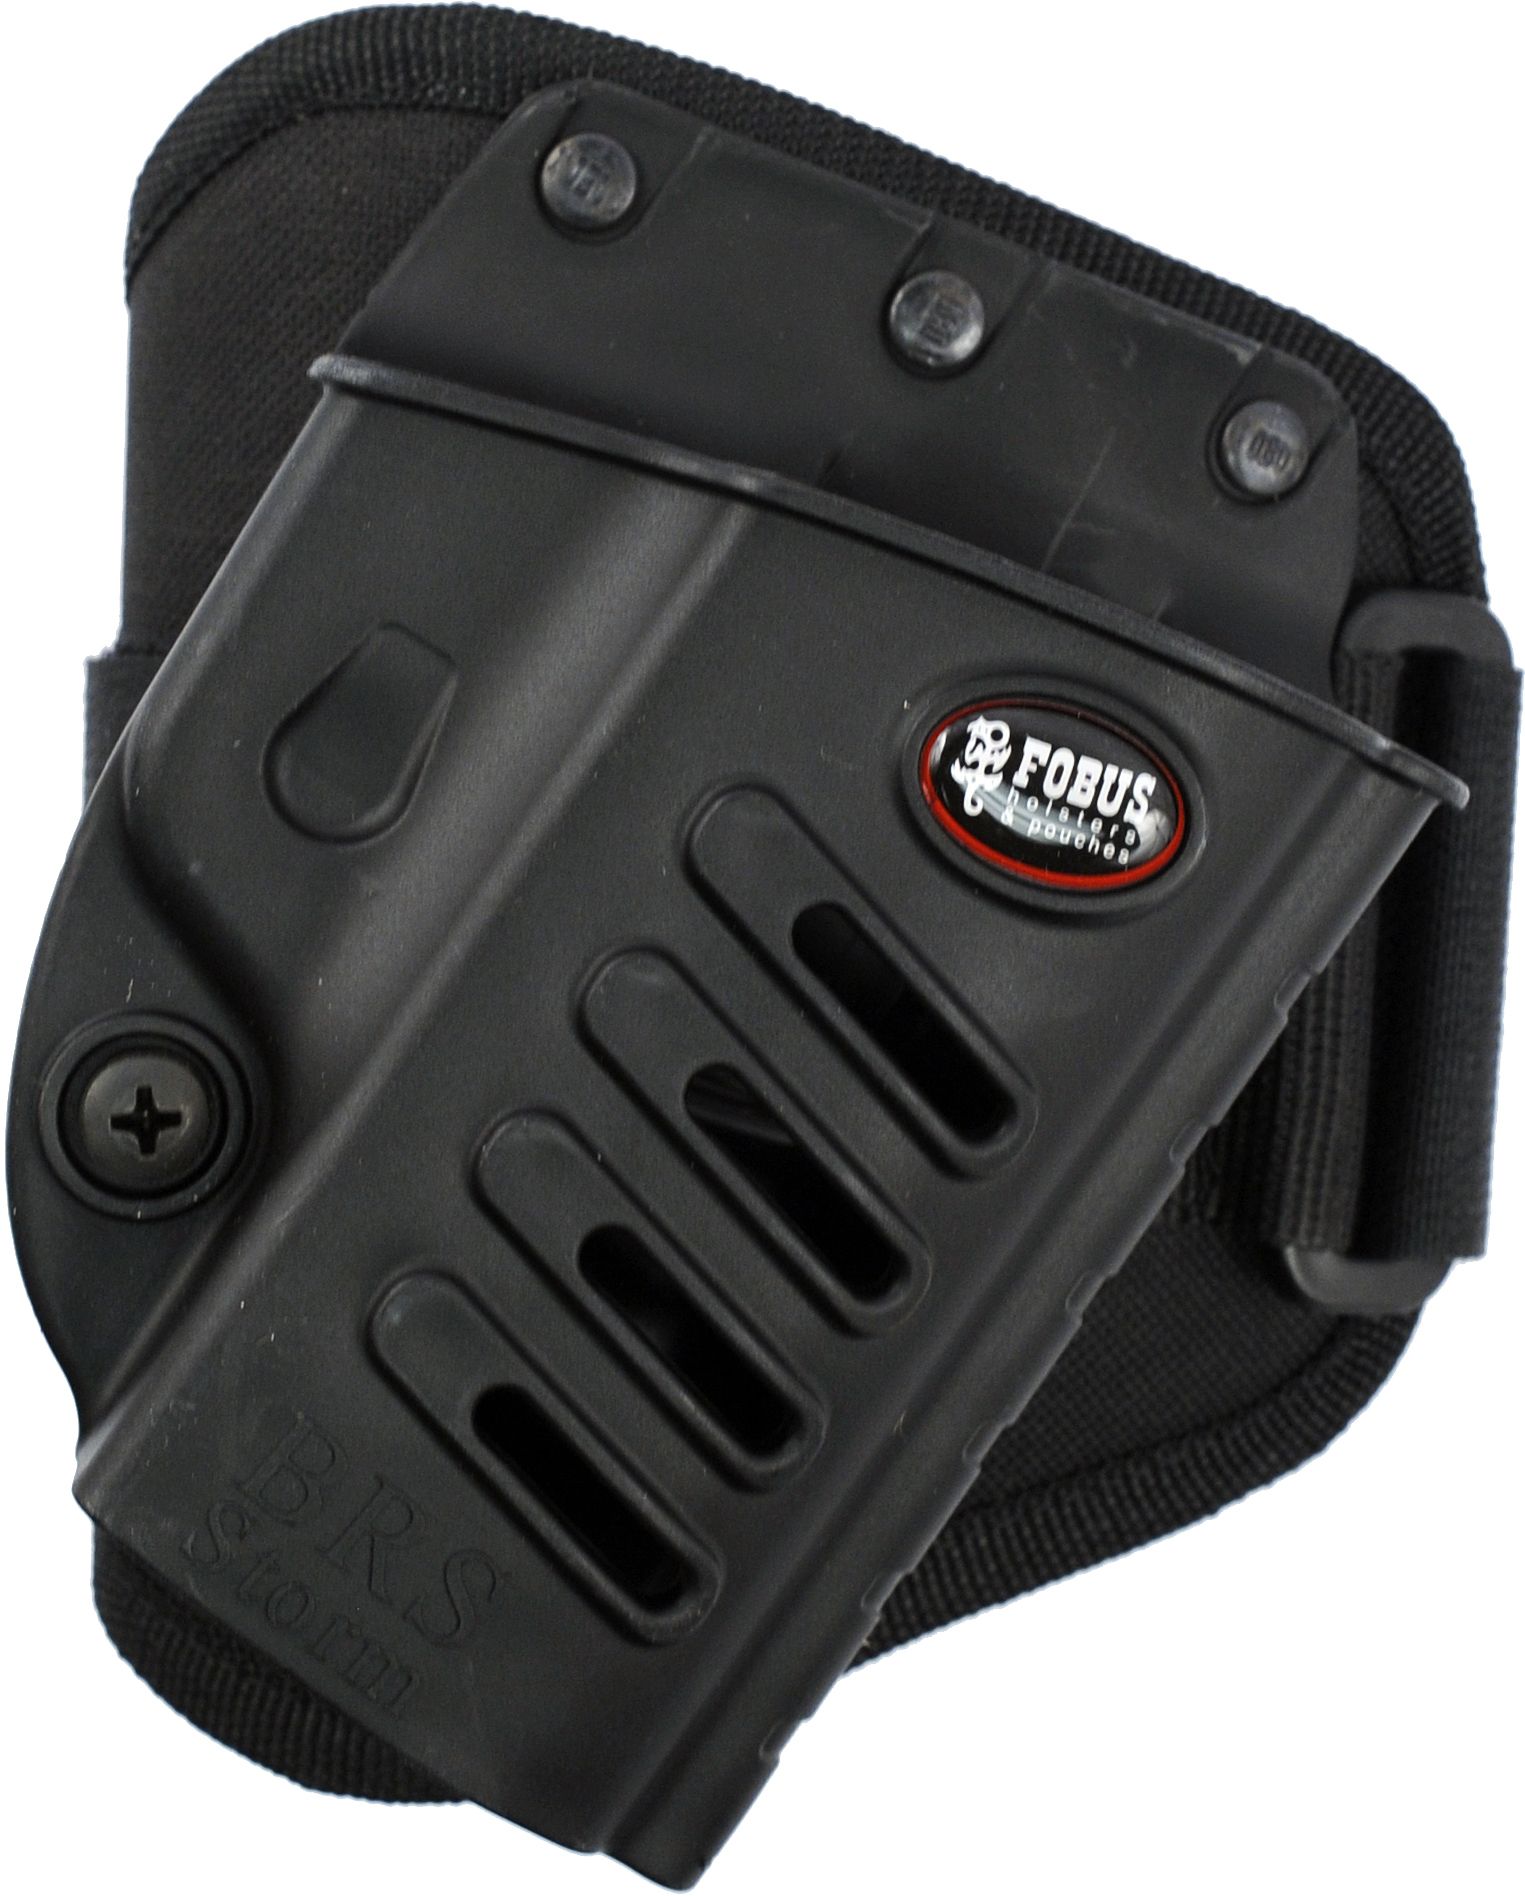 Fobus Ankle Holster Right Hand Black - Beretta PX4 Storm compact - PX4A